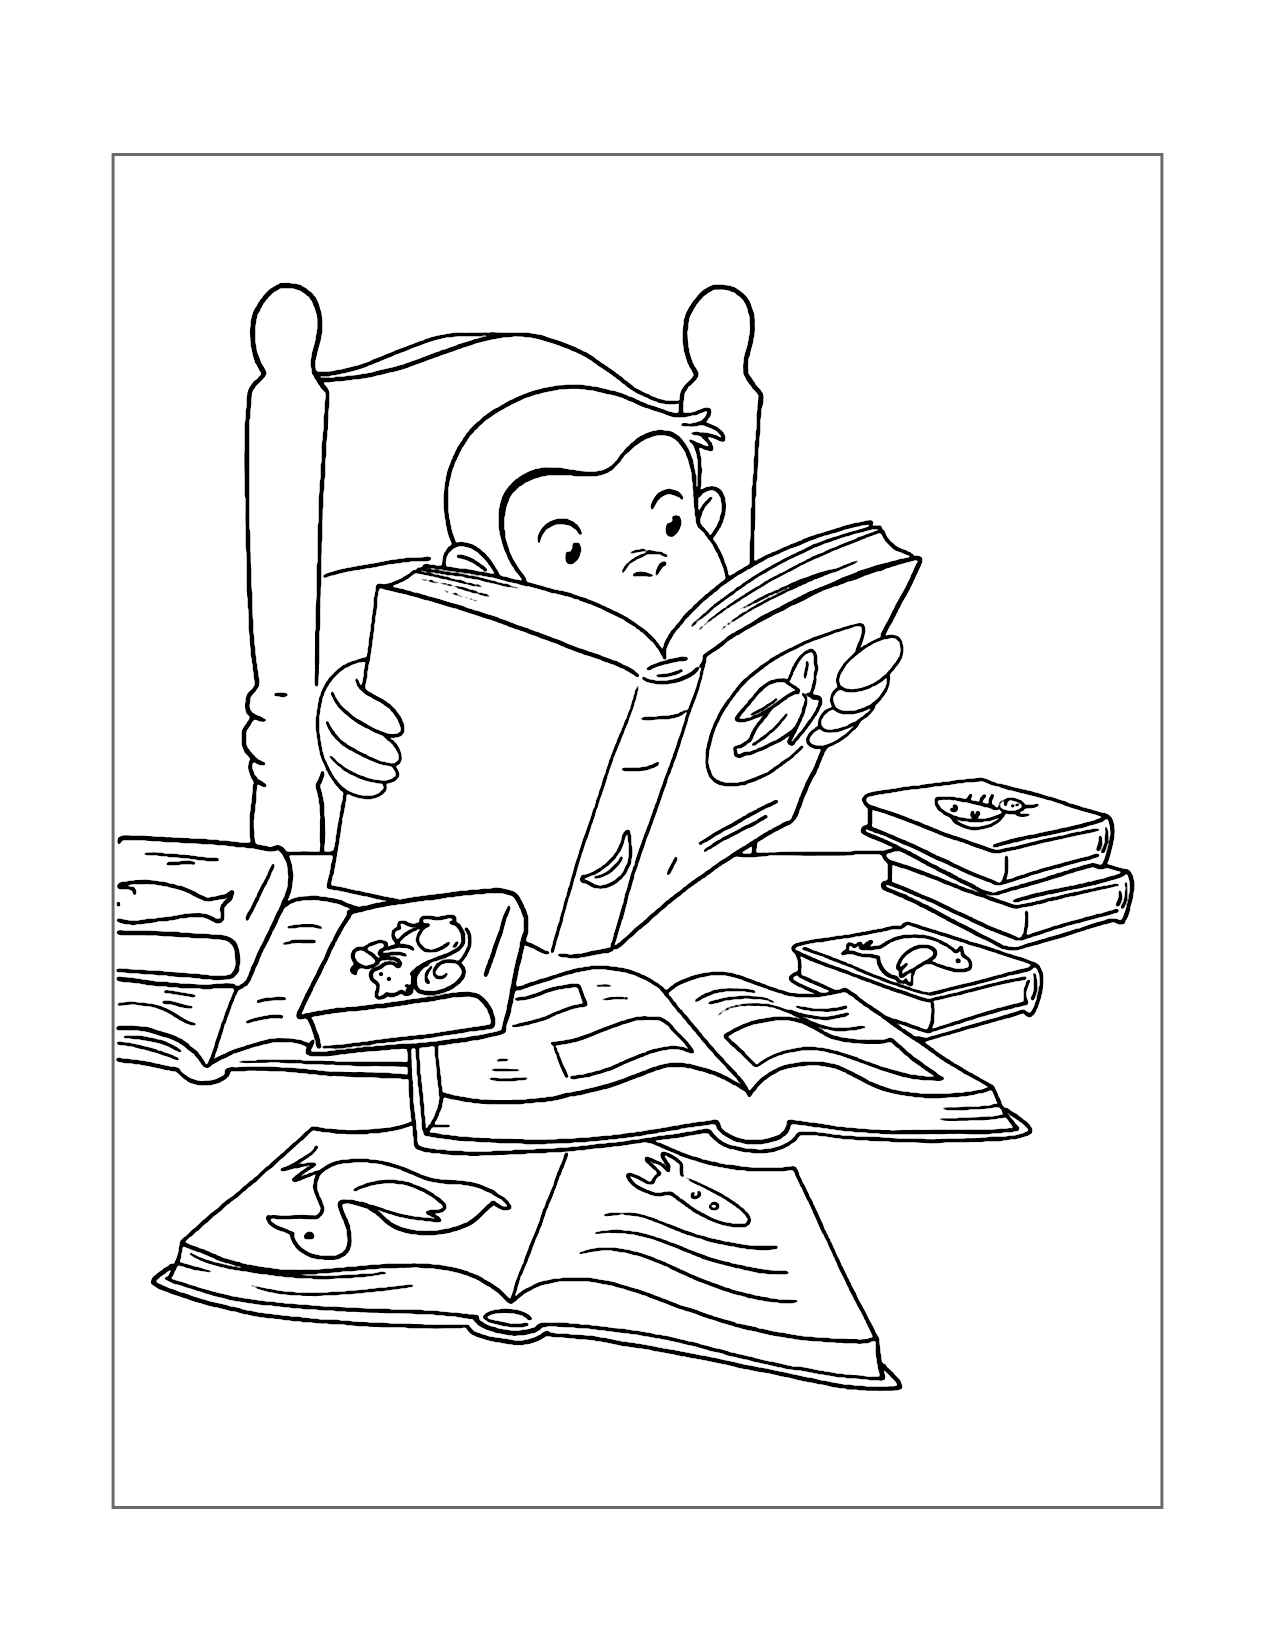 Curious George Reading Books Coloring Page